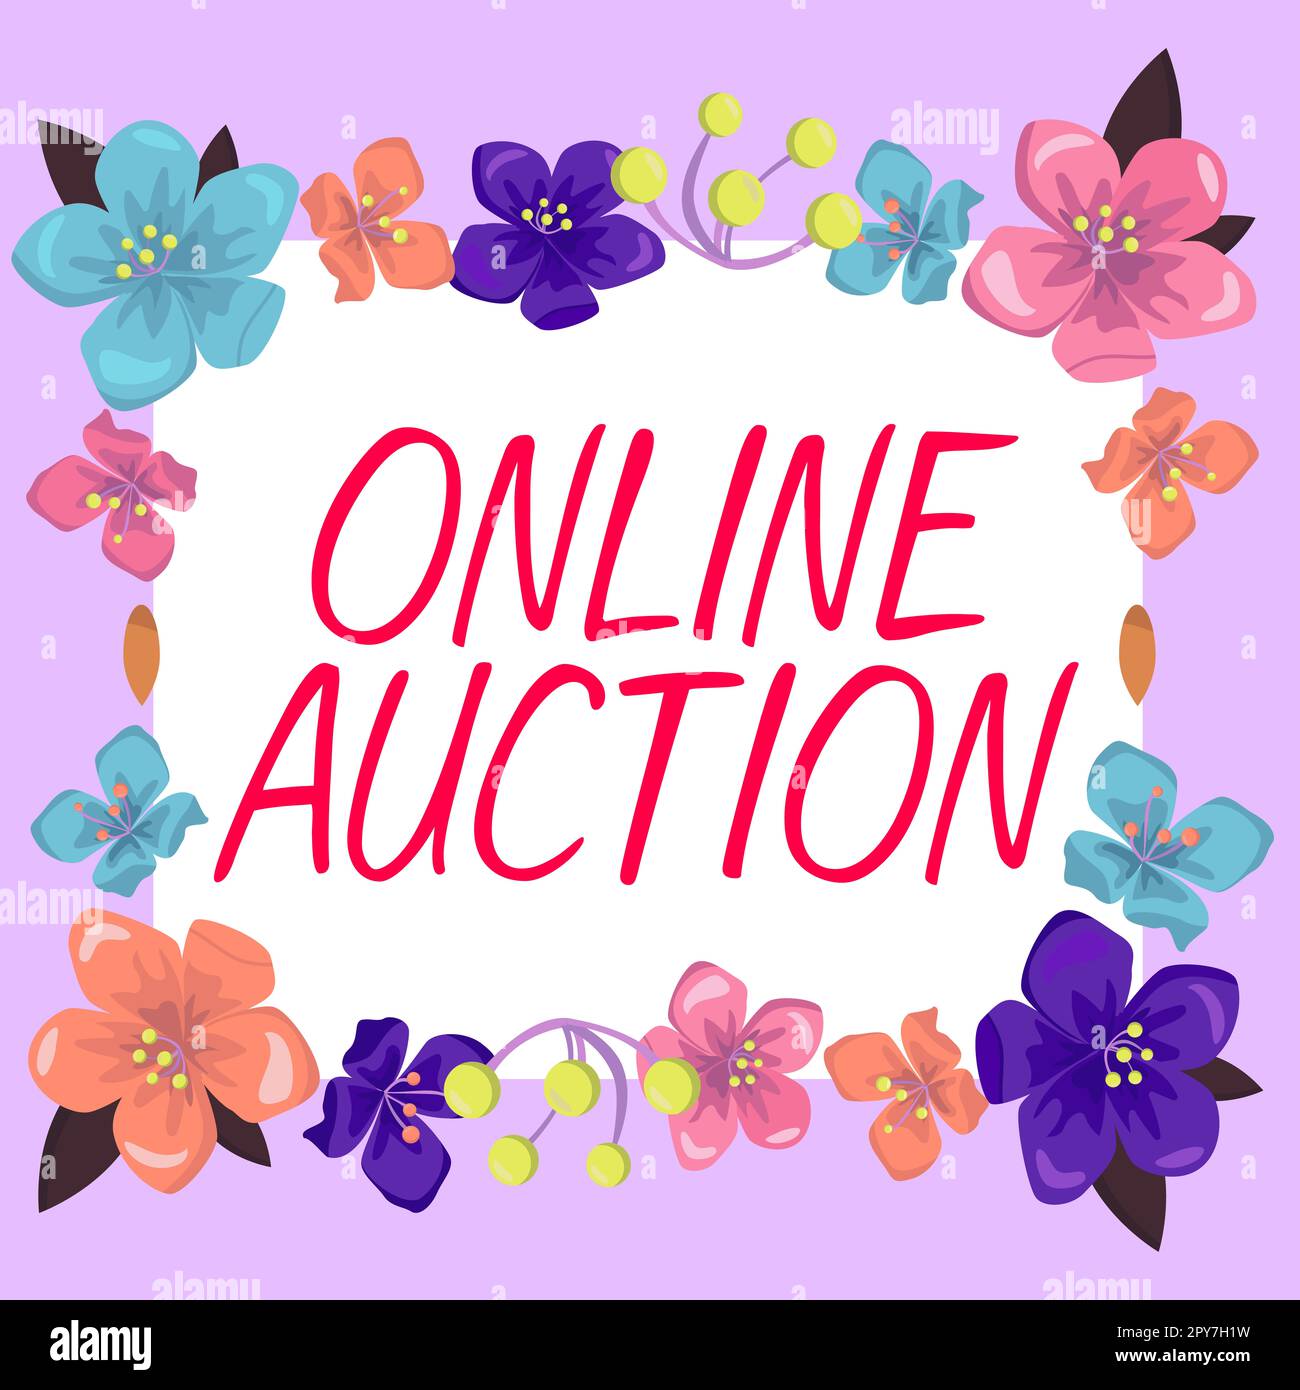 Conceptual caption Online Auction. Business showcase process of buying and selling goods or services online Stock Photo